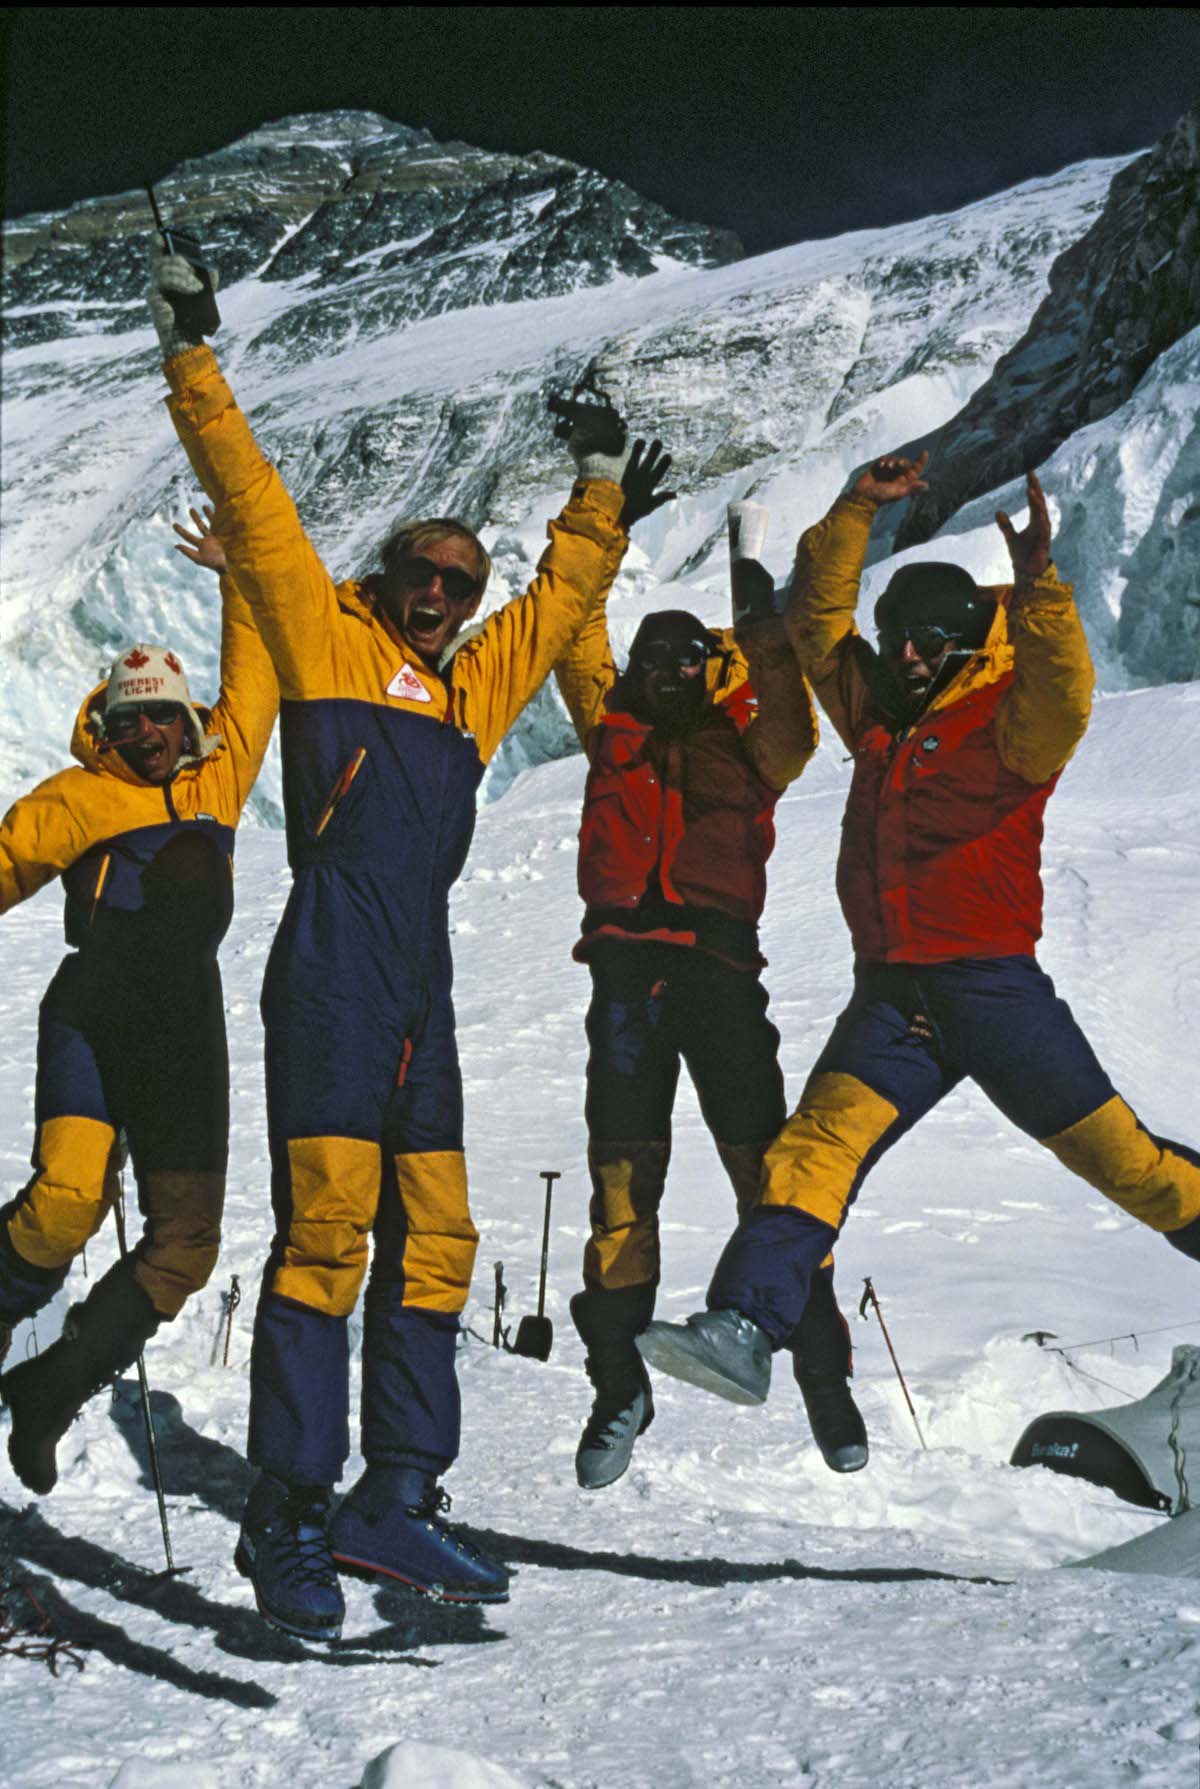 Everest Light Team celebrates after summit news. [Photo] Chris Shank, courtesy of Mountaineers Books